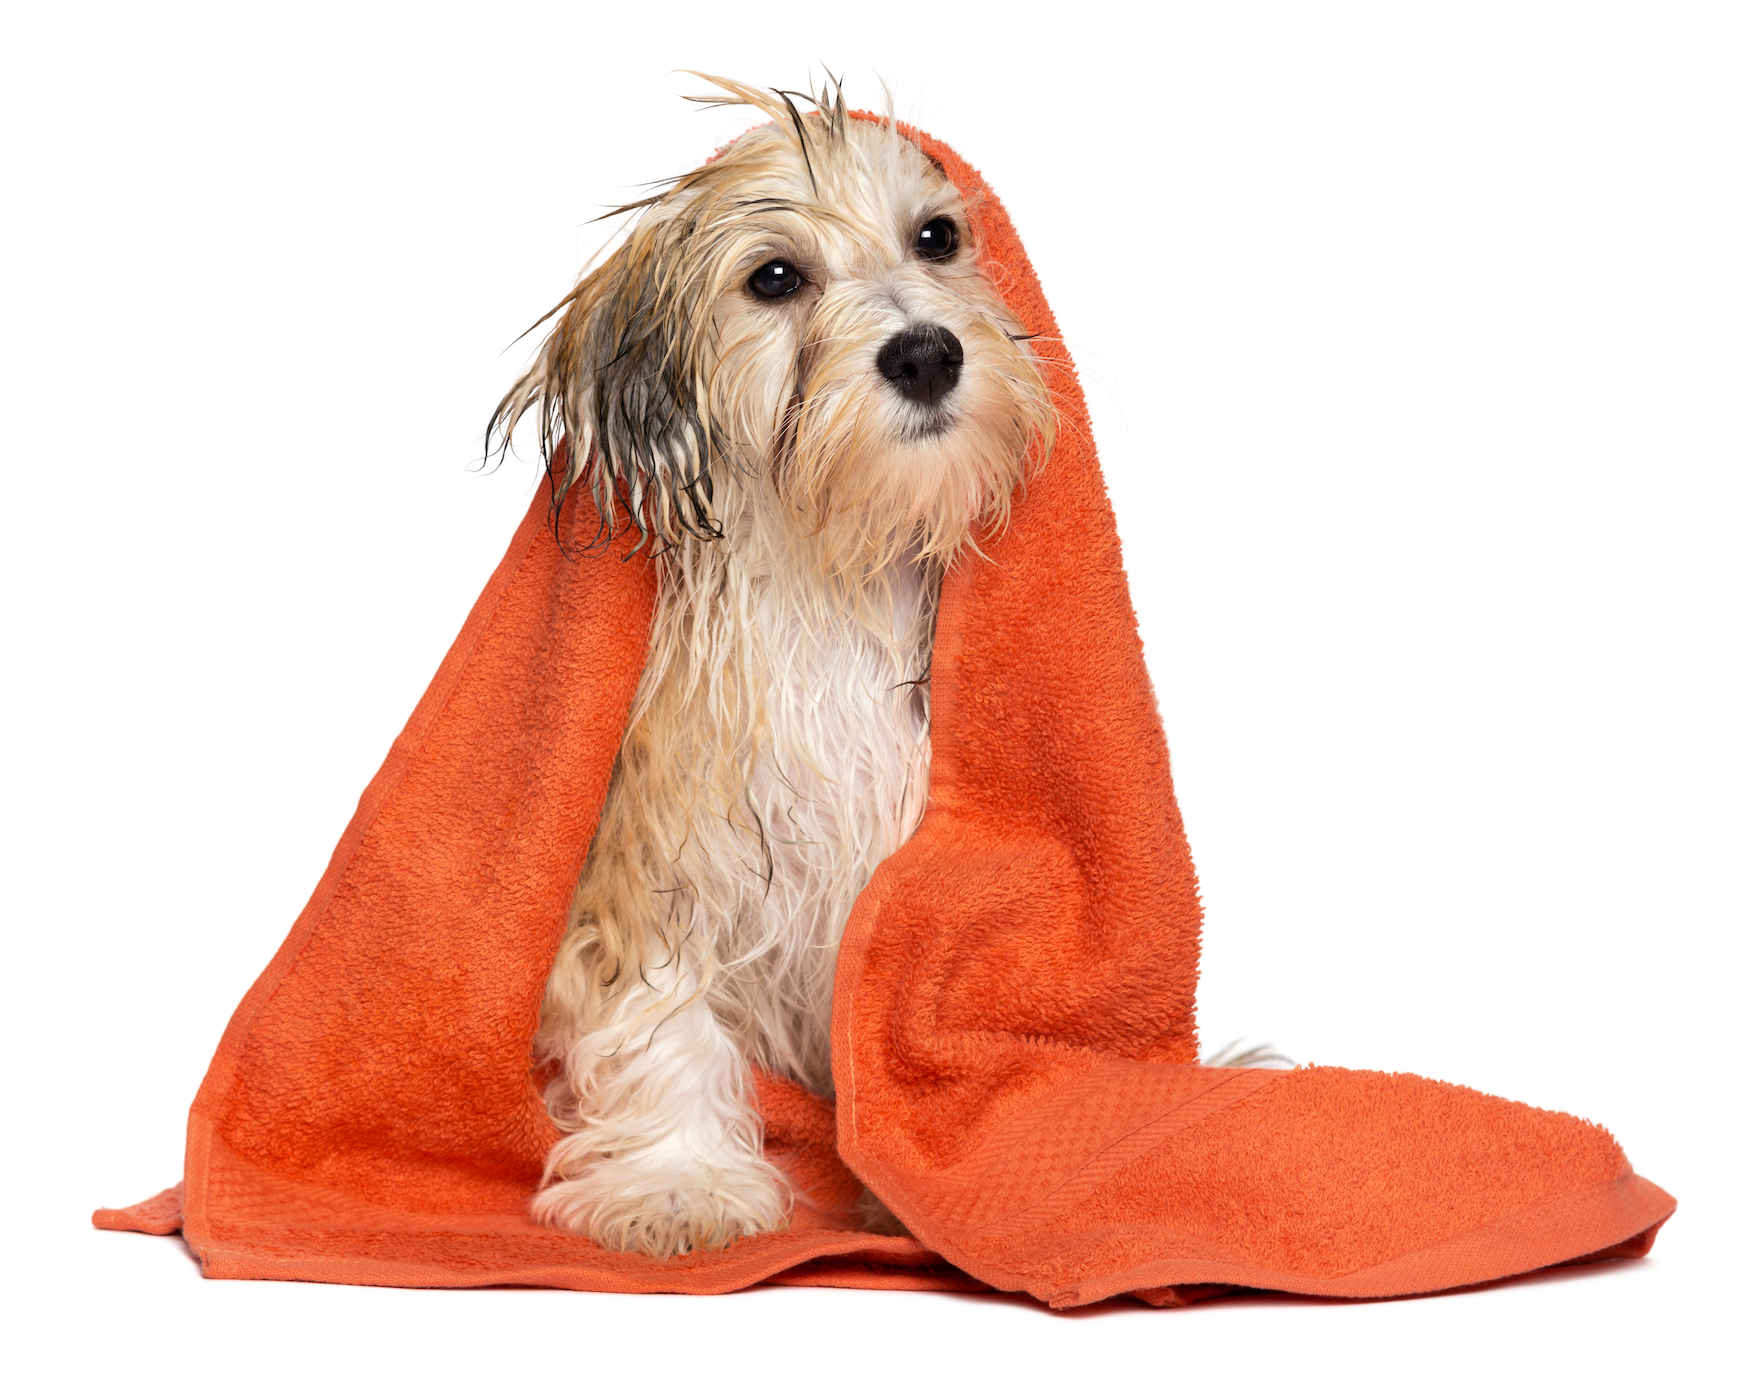 Avoiding wet dog woes: tips to keep your dog comfortable on rainy days